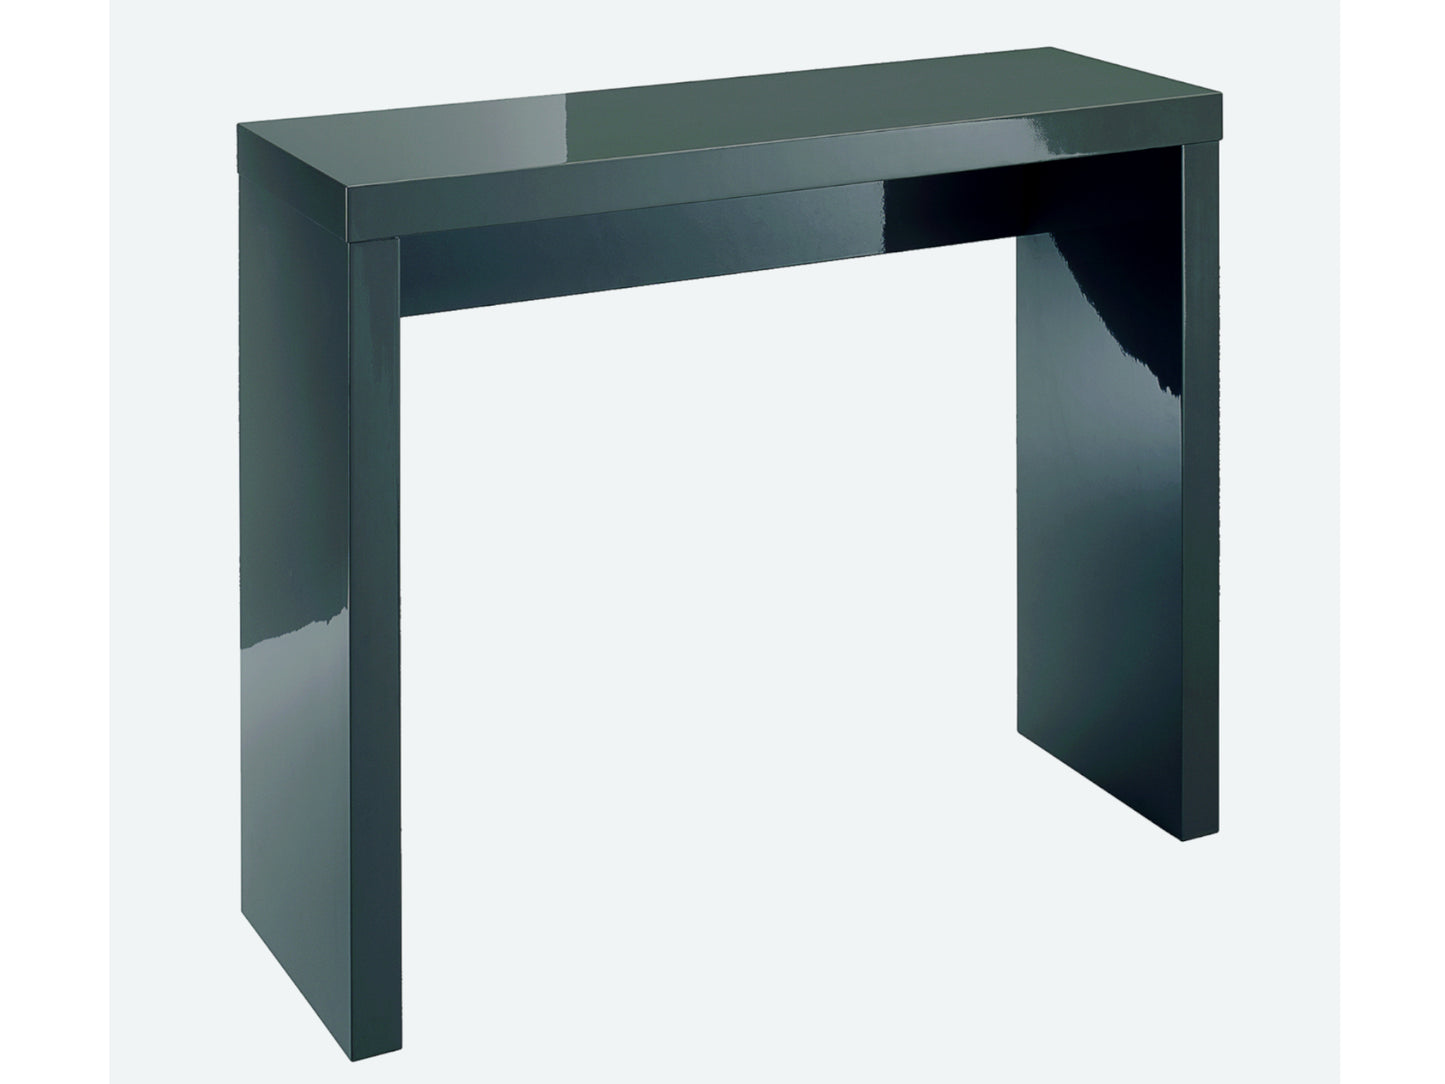 Puro Console Table in Charcoal